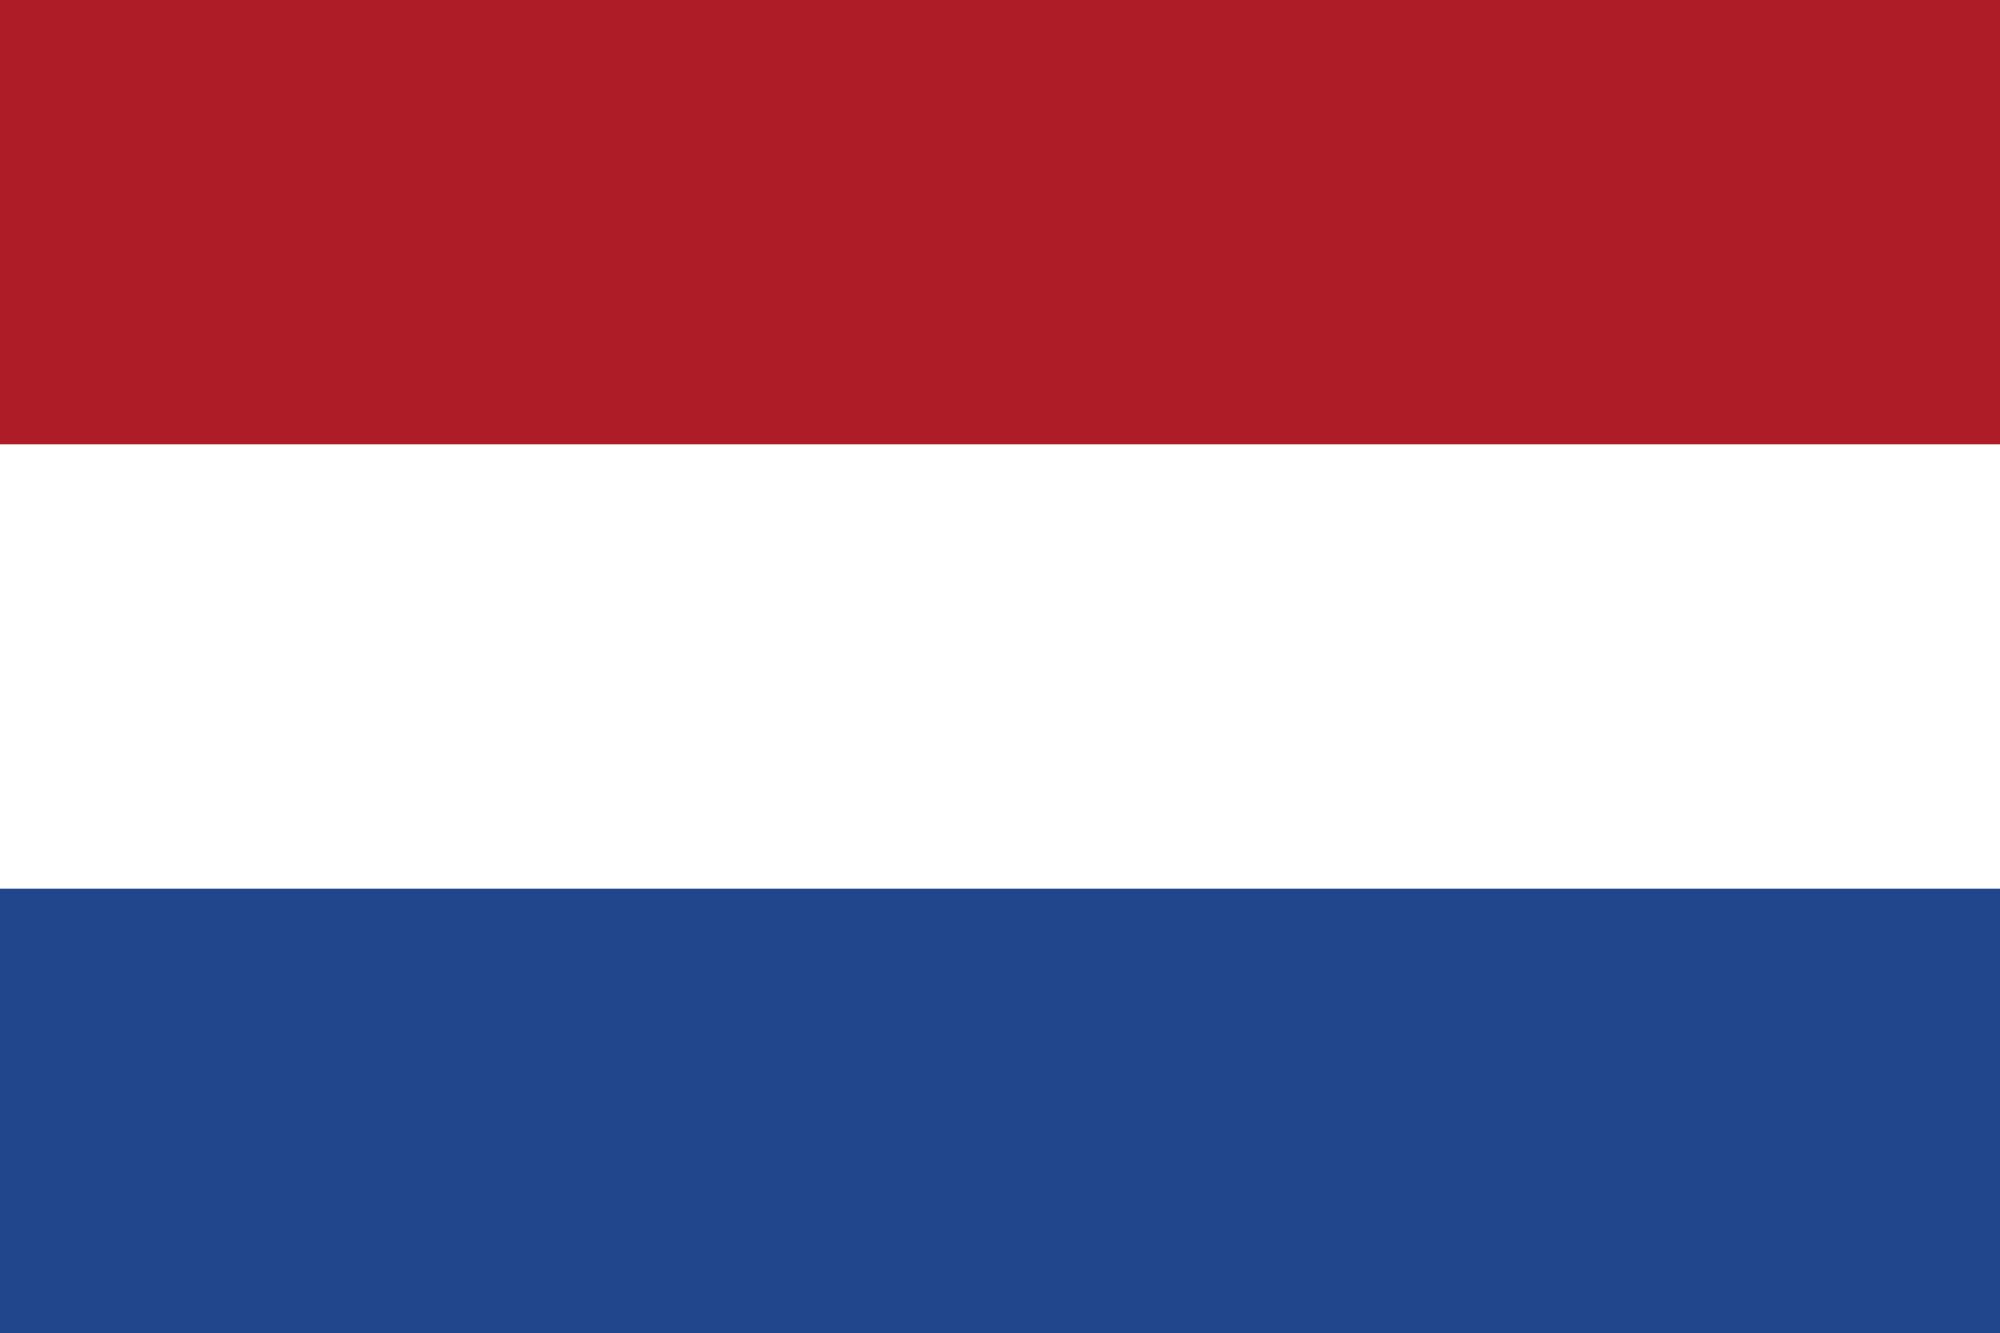 History of the Netherlands